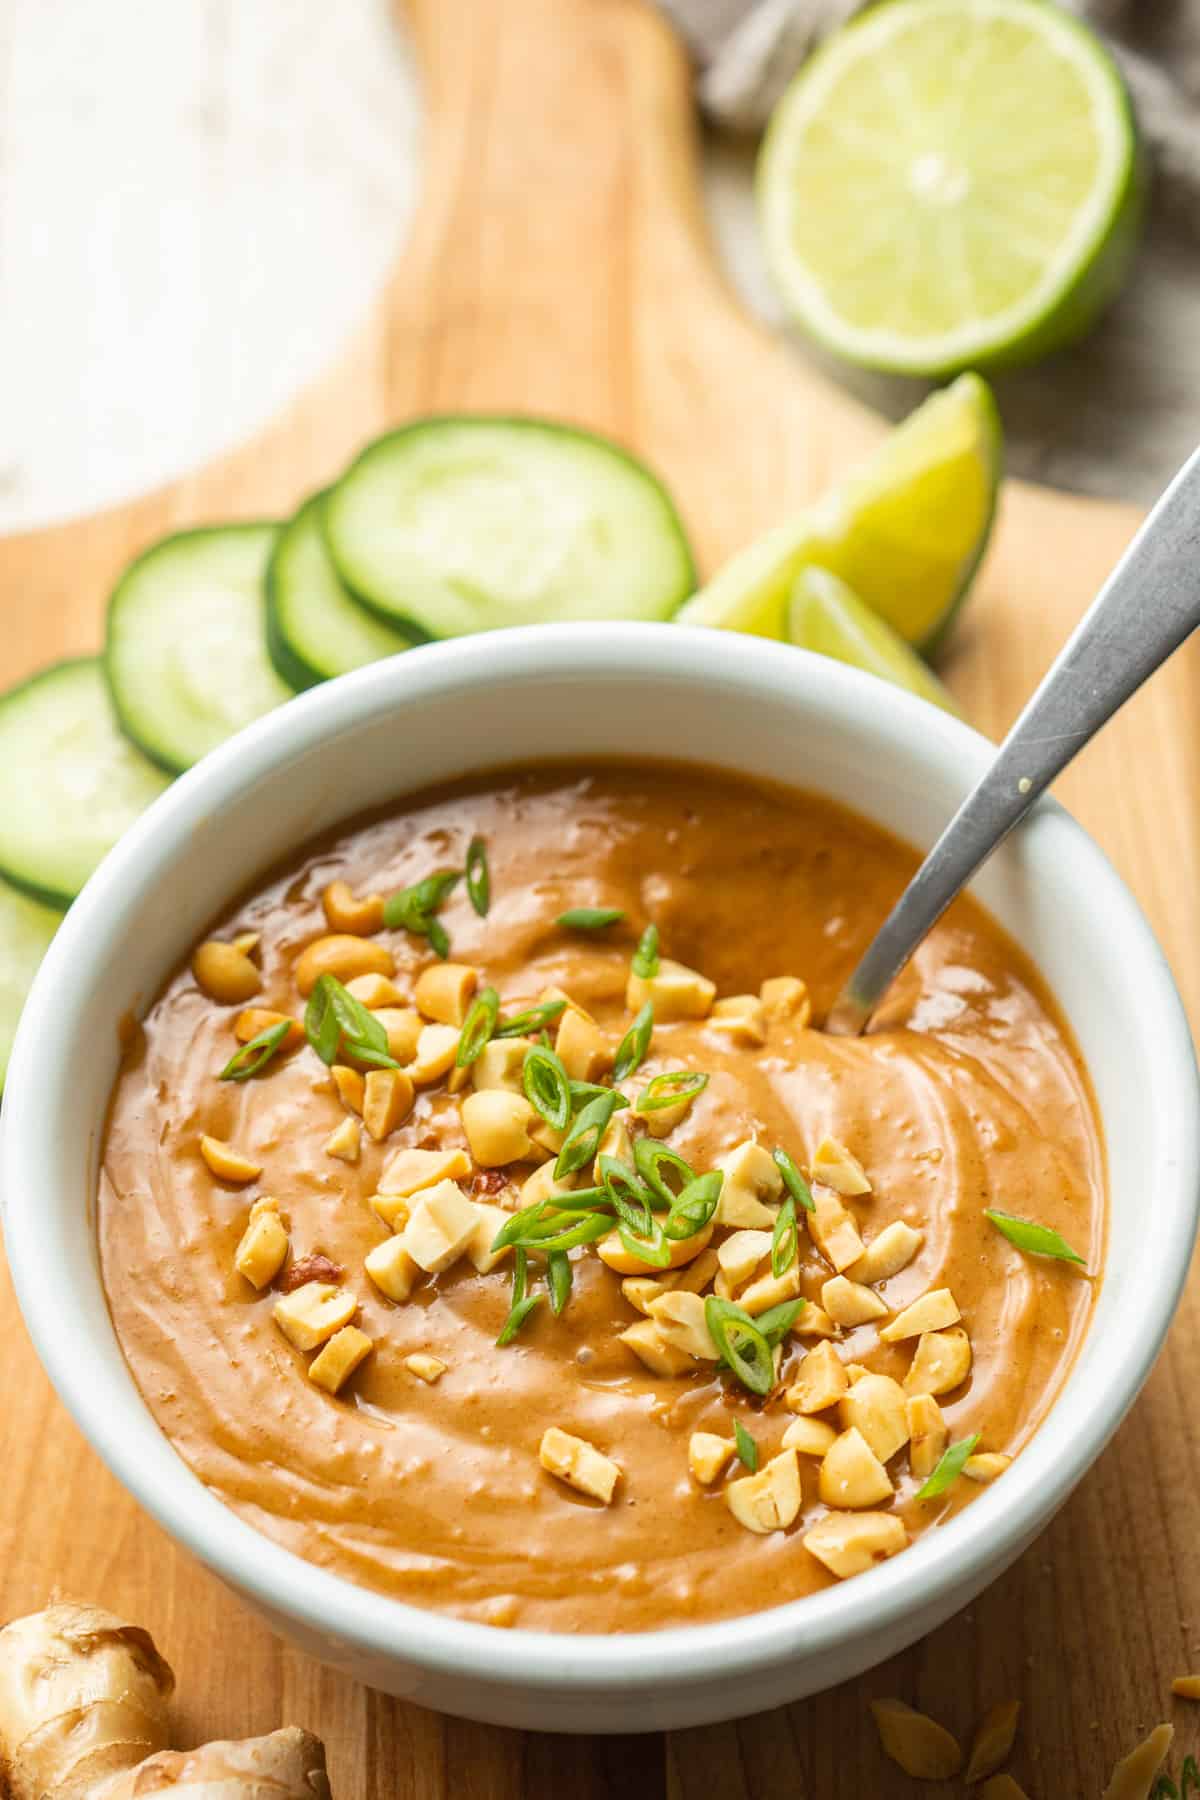 Bowl of Vegan Peanut Sauce with a spoon in it, cucumber slices in the background.